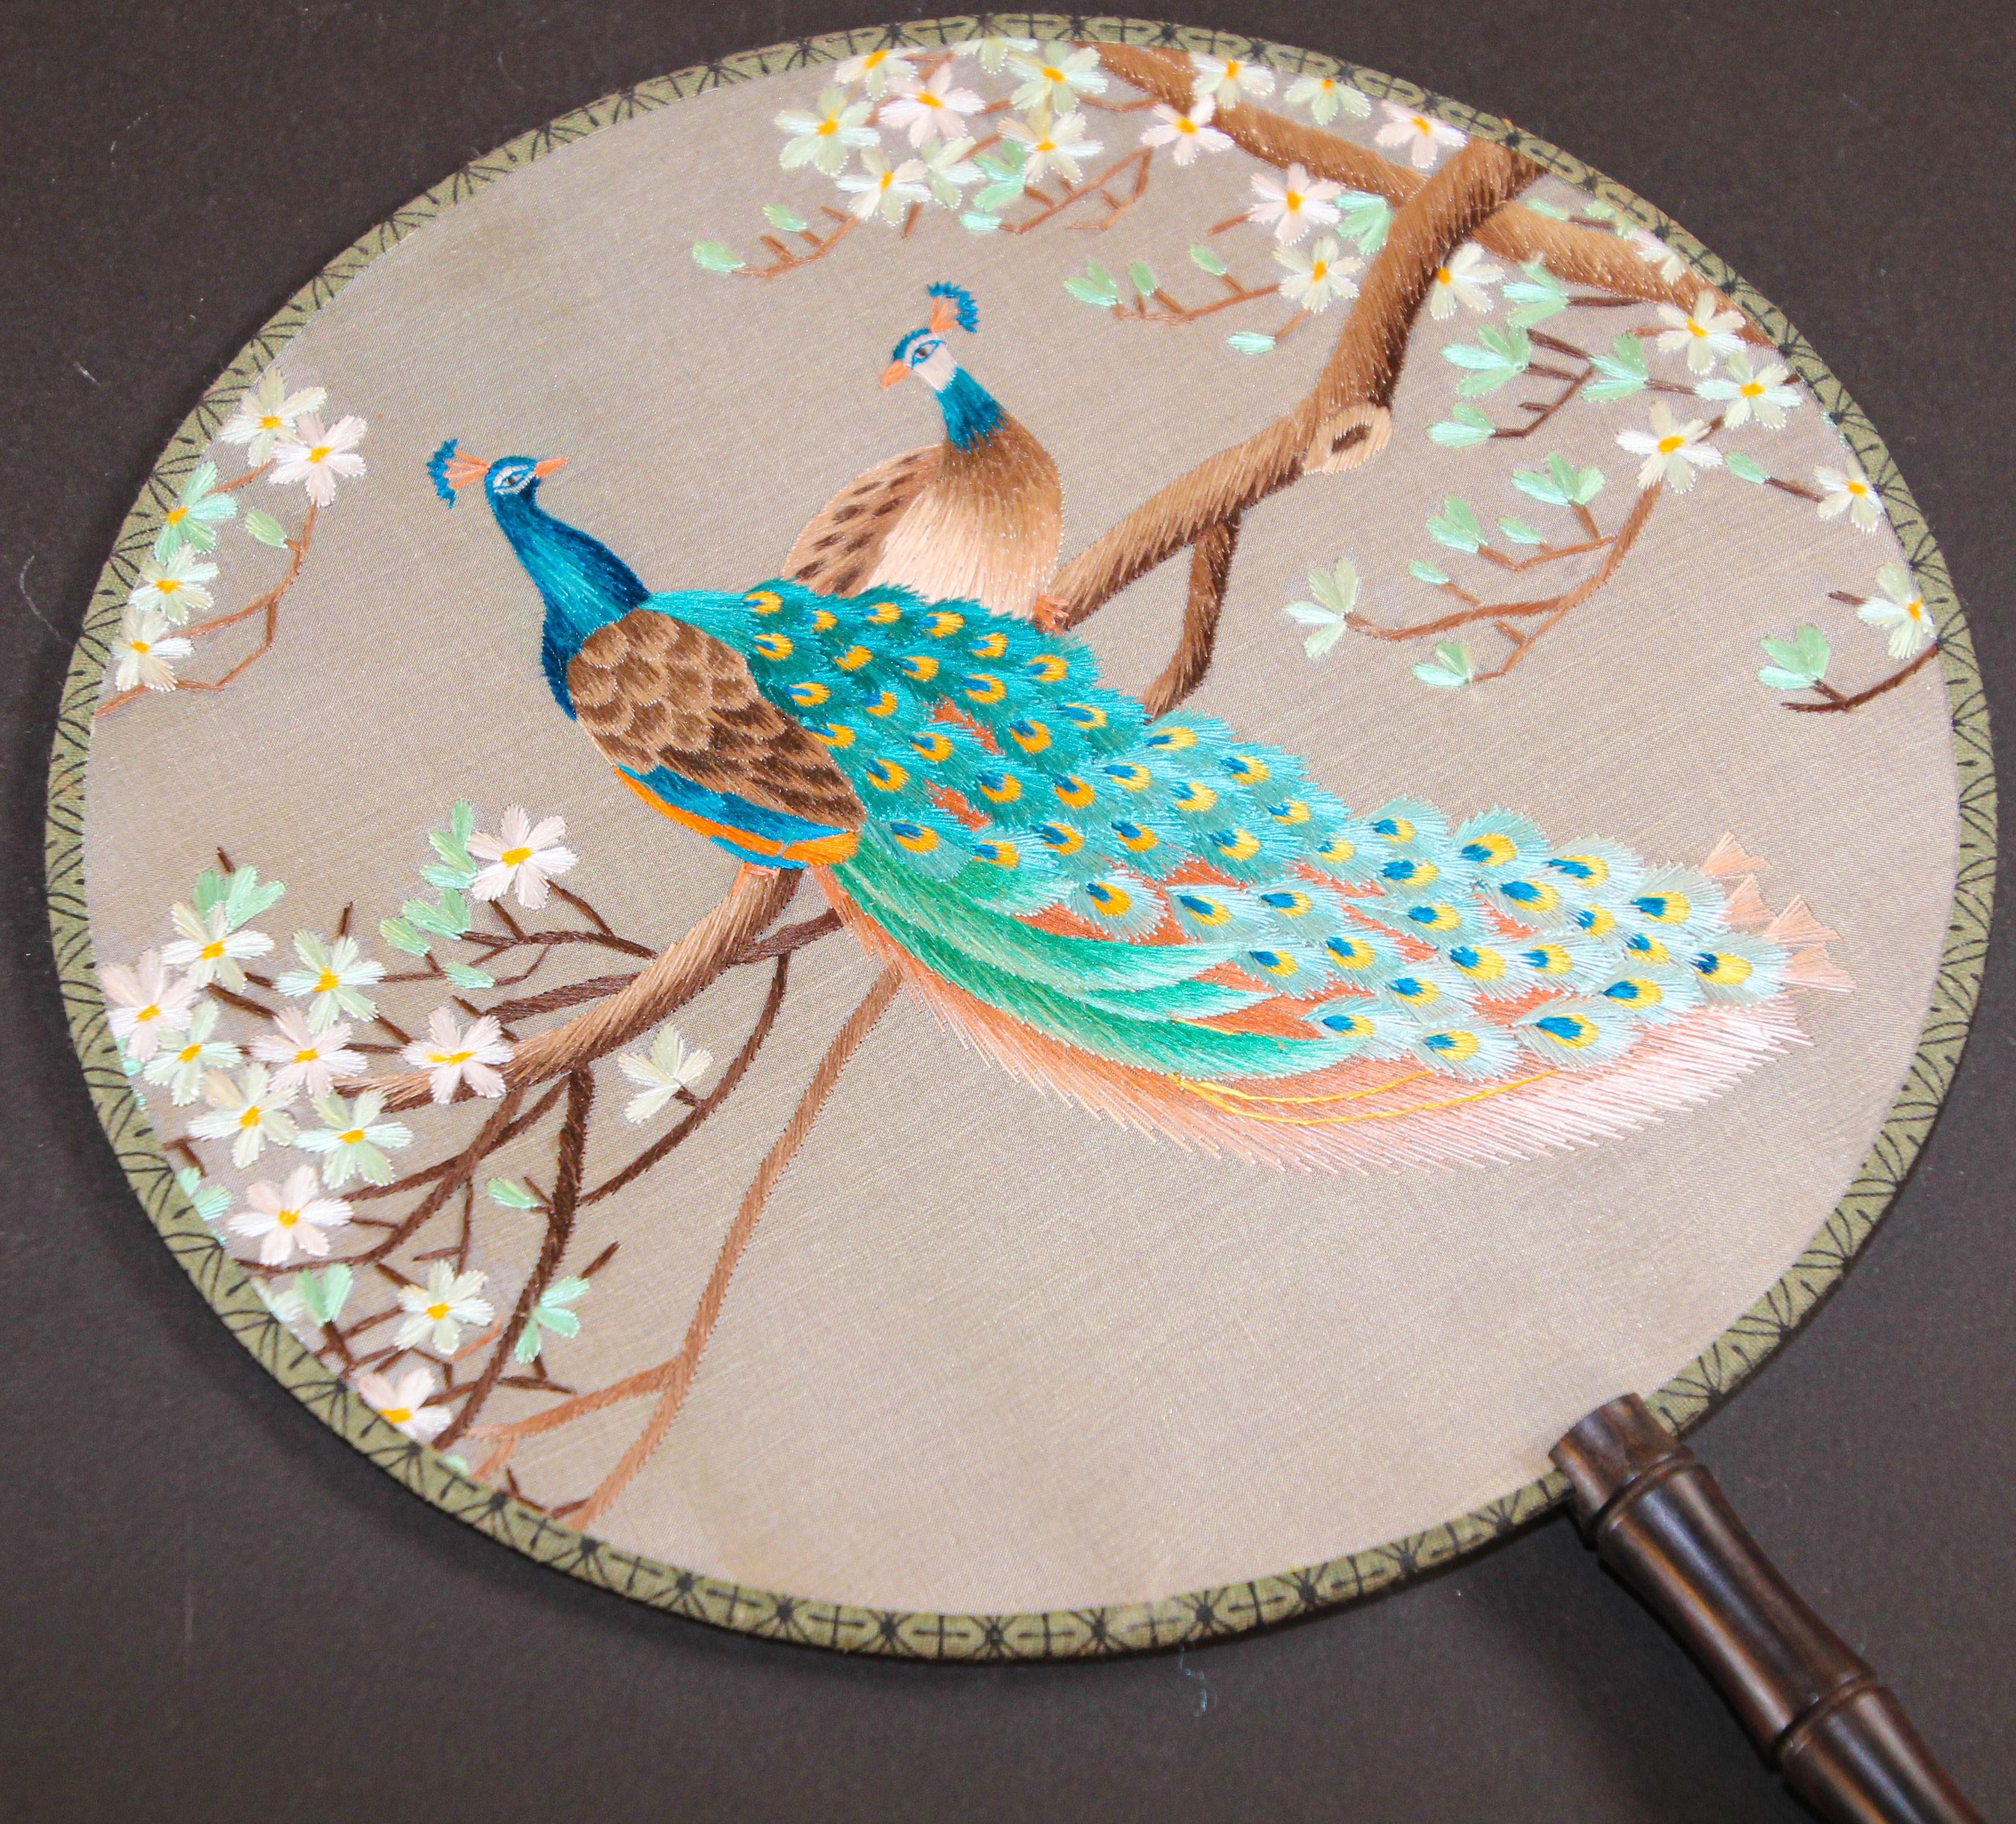 Asian Chinese silk round paddle fan, hand fan with two peacocks perched on a tree embroidered.
Vintage Asian hand fans decorated with with peacocks embroidered.
Chinoiserie silk paddle fan with with peacocks embroidered designs in both sides,